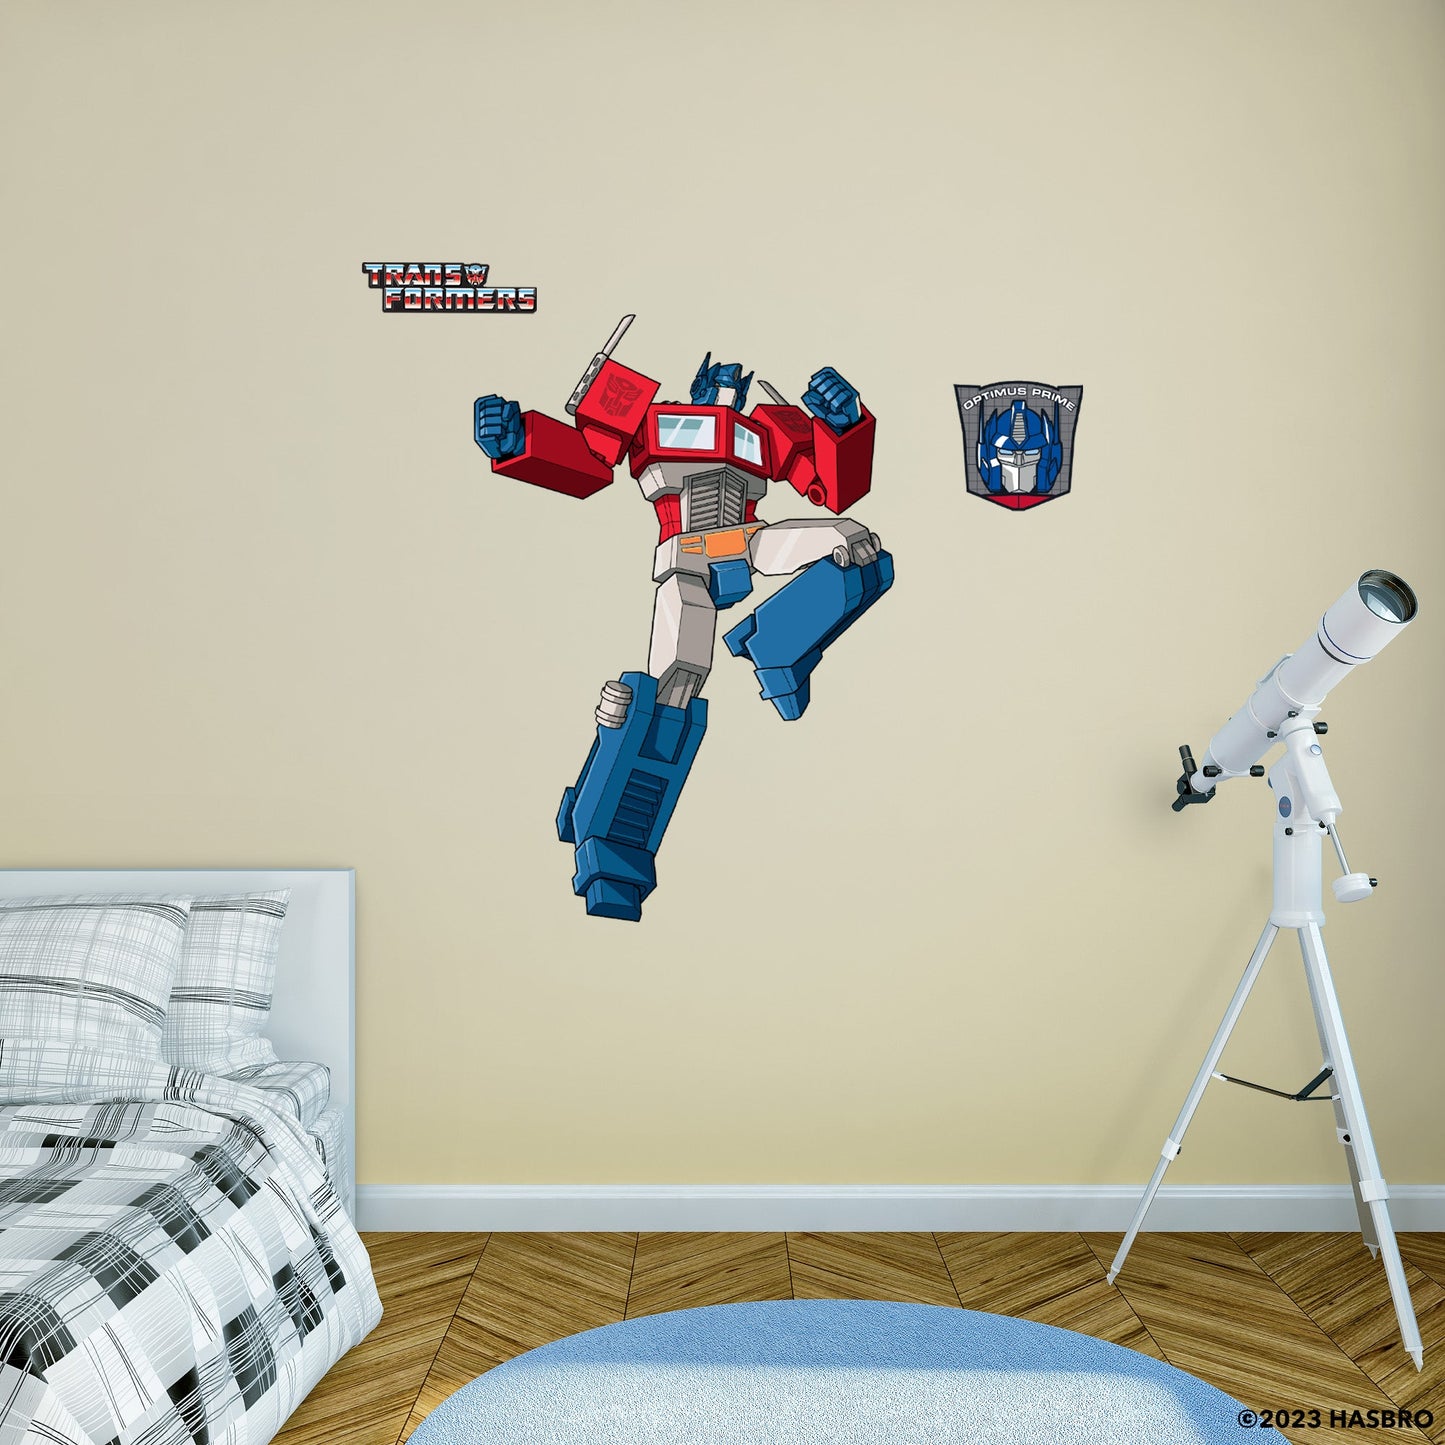 Transformers Classic: Optimus Prime RealBig - Officially Licensed Hasbro Removable Adhesive Decal